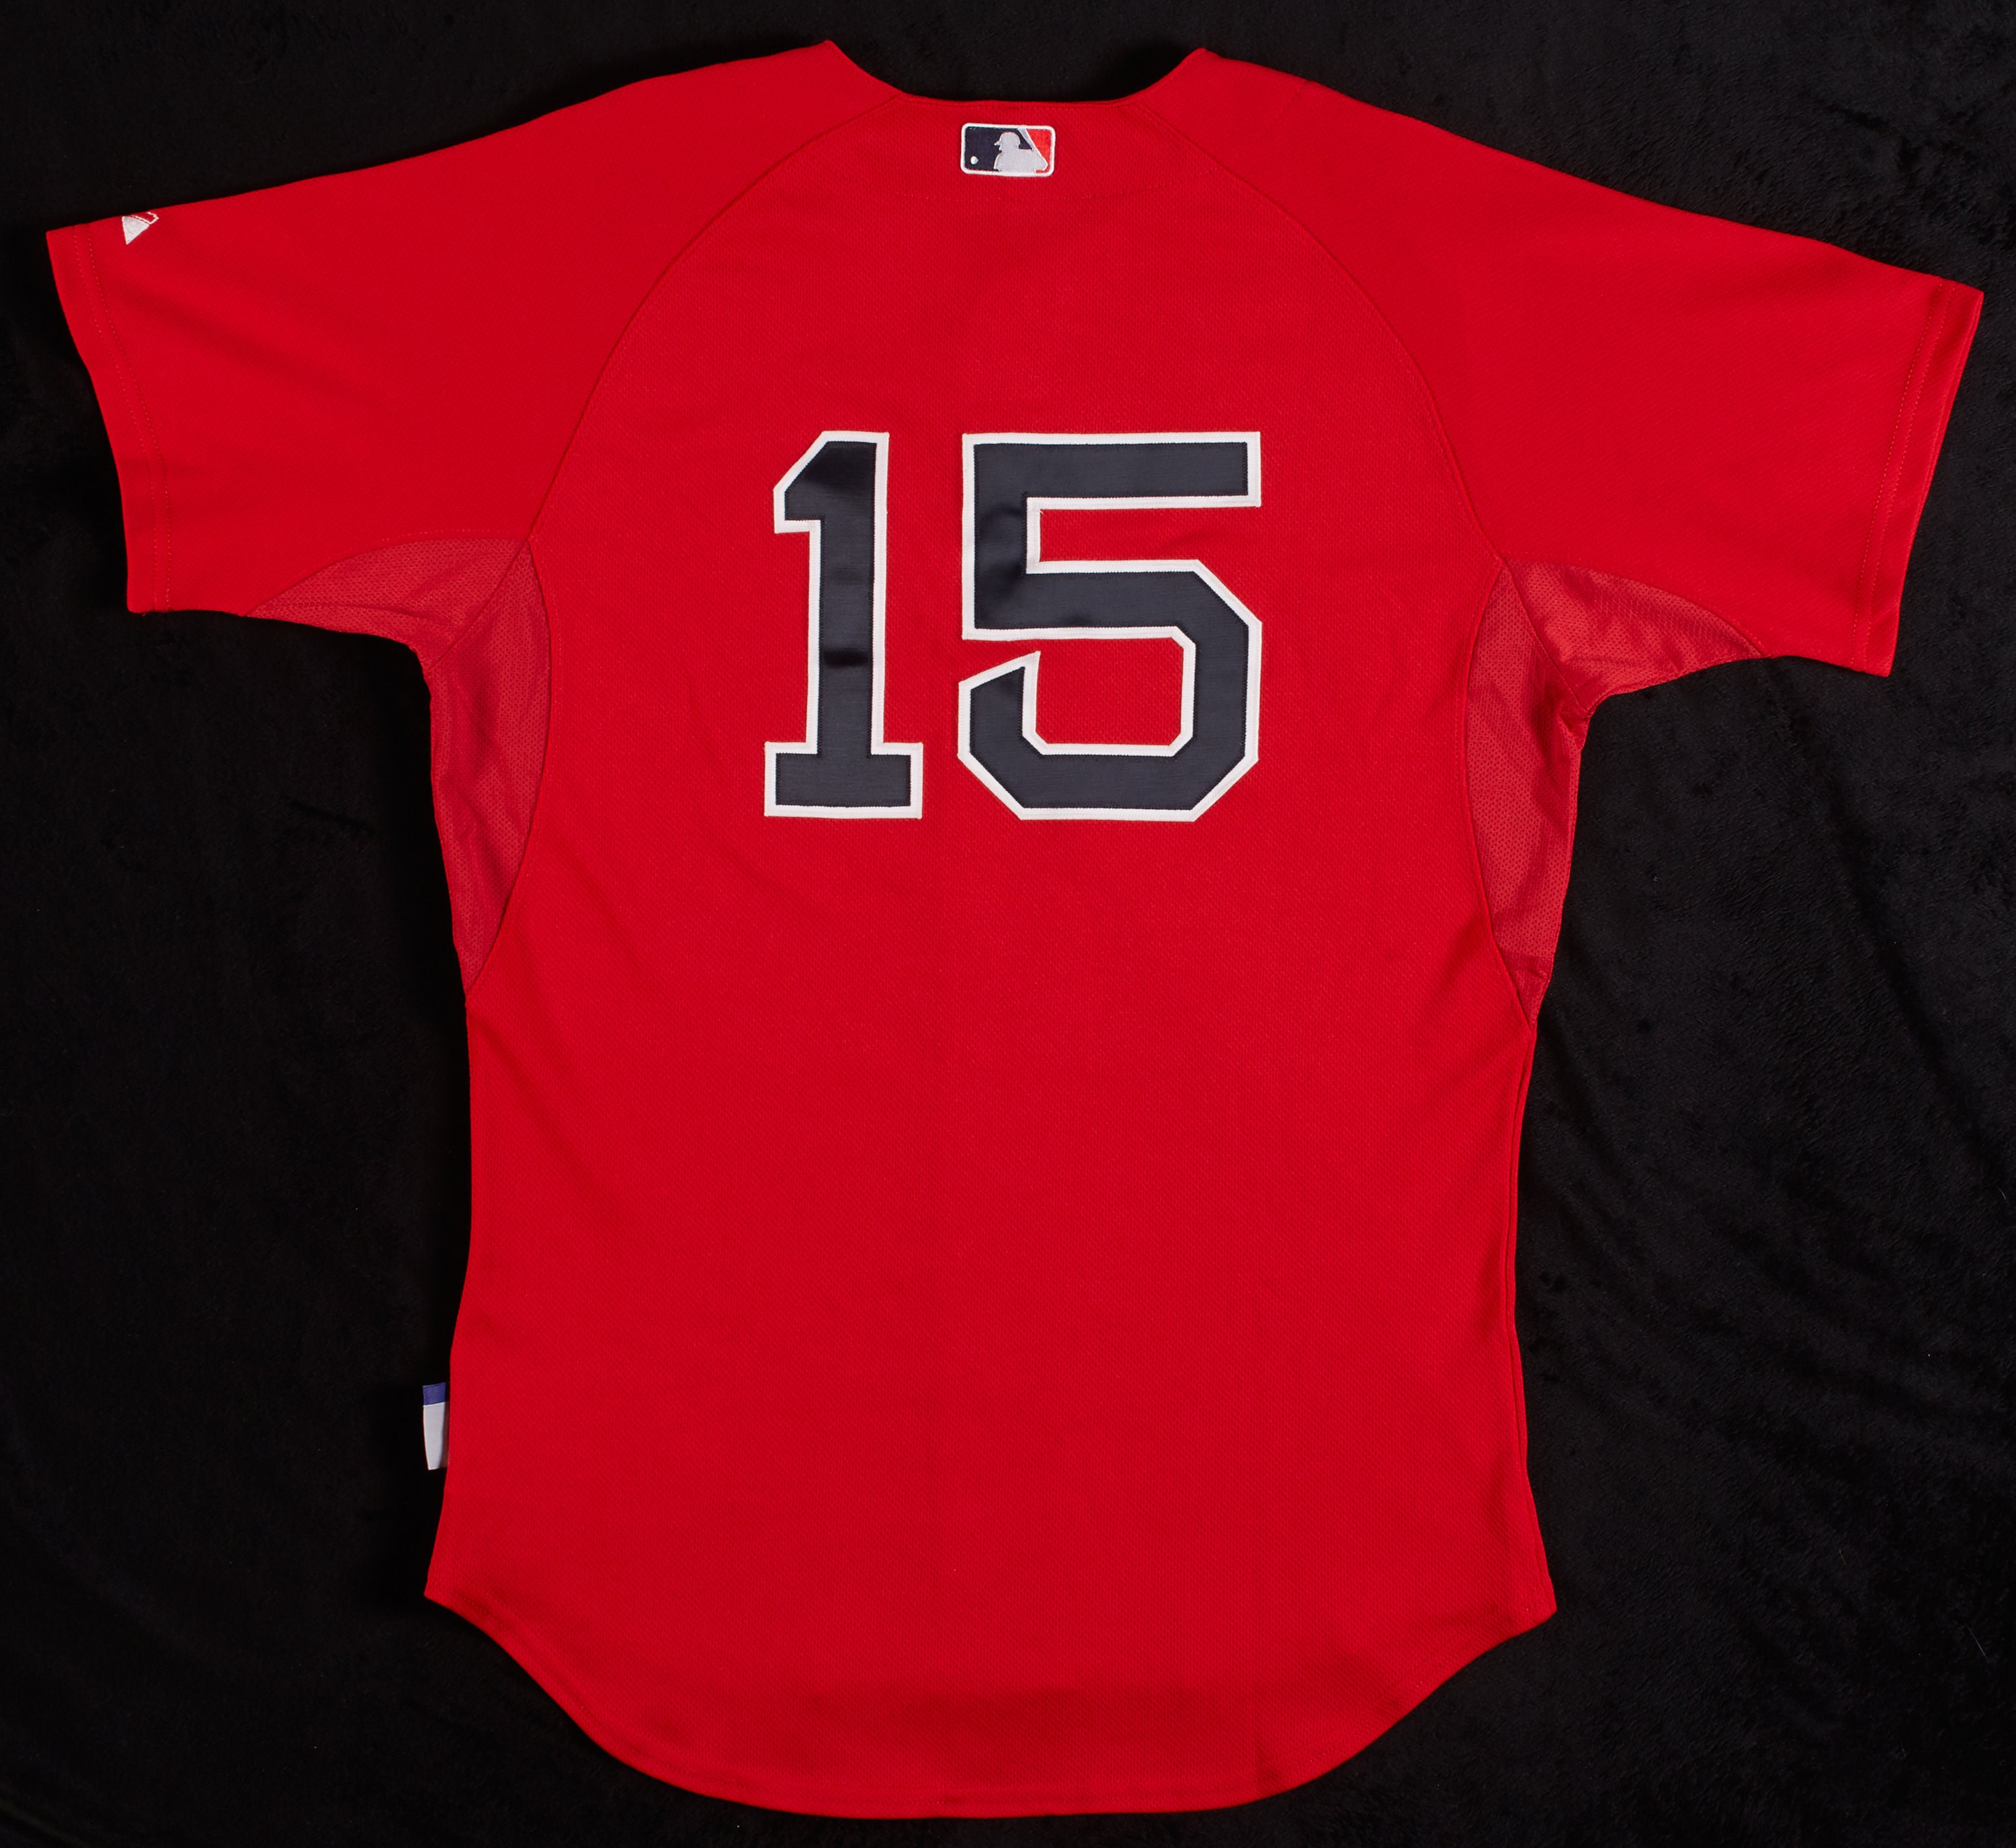 Boston Sports - 2010 Dustin Pedroia Red Sox vs. Yankees Game Worn Jersey (MLB Holo & Steiner)